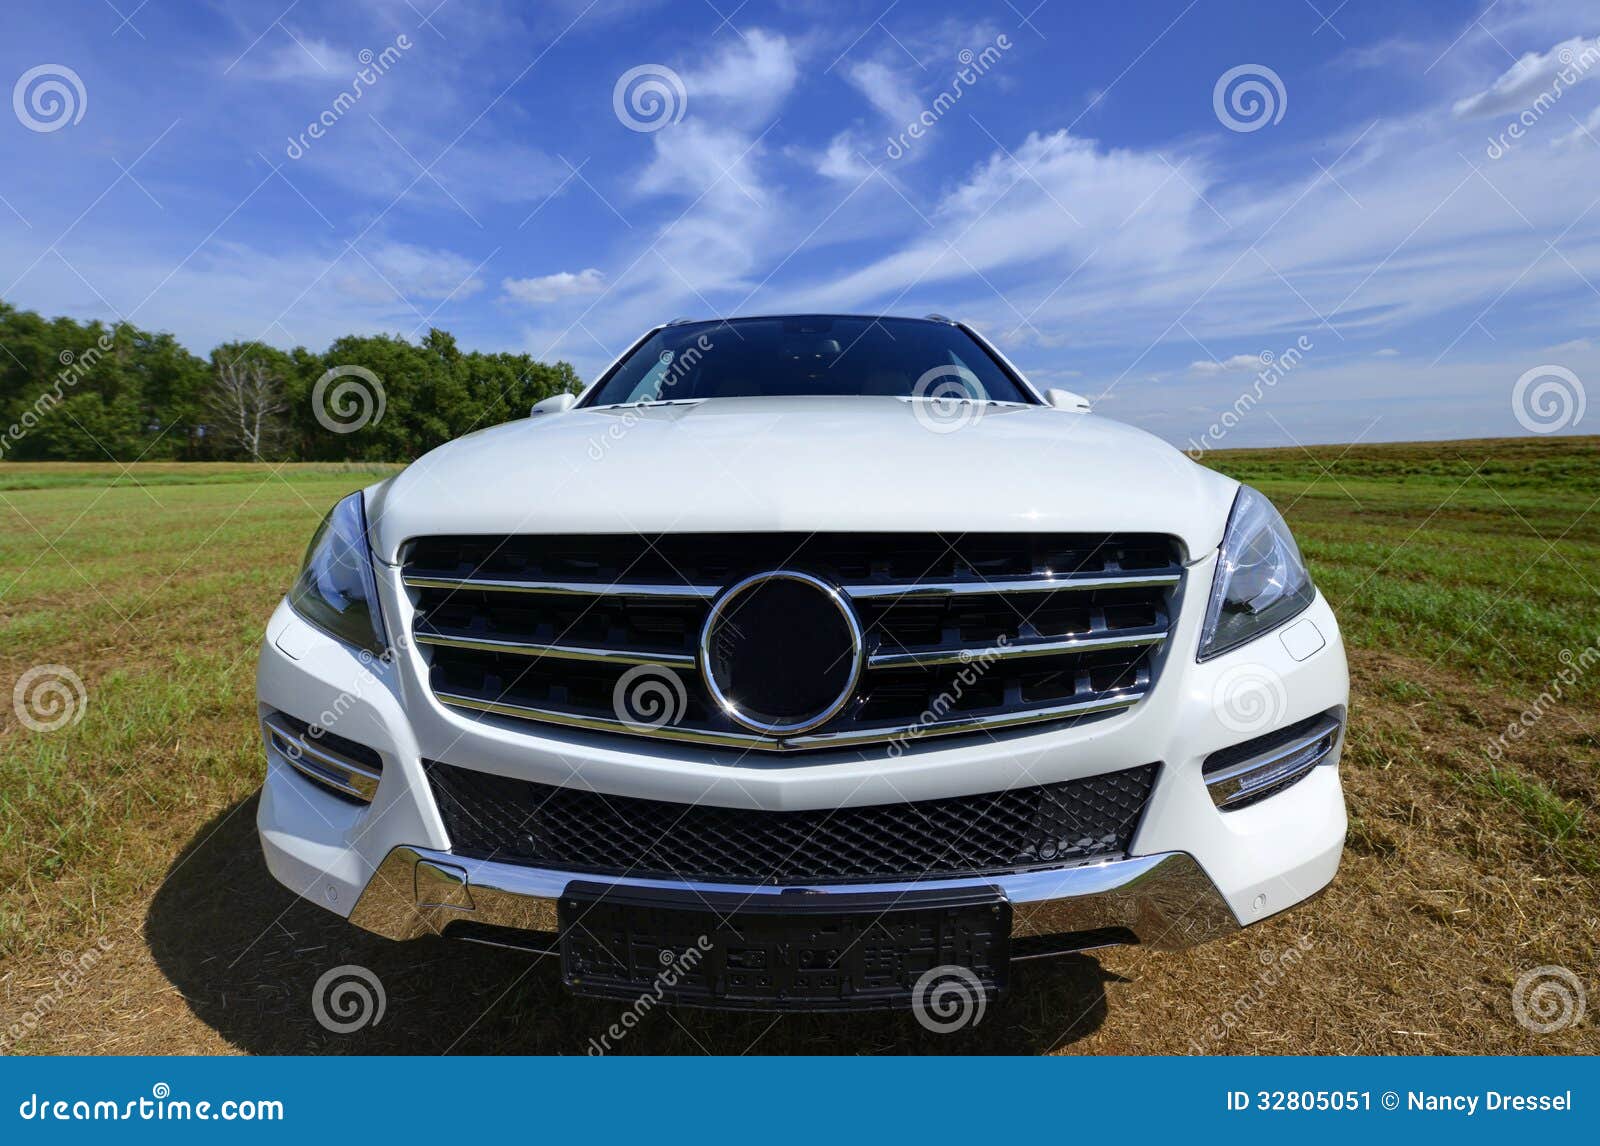 Brandnew White Mercedes Benz Ml Model 2013 Stock Image Image Of Lonely Driving 32805051